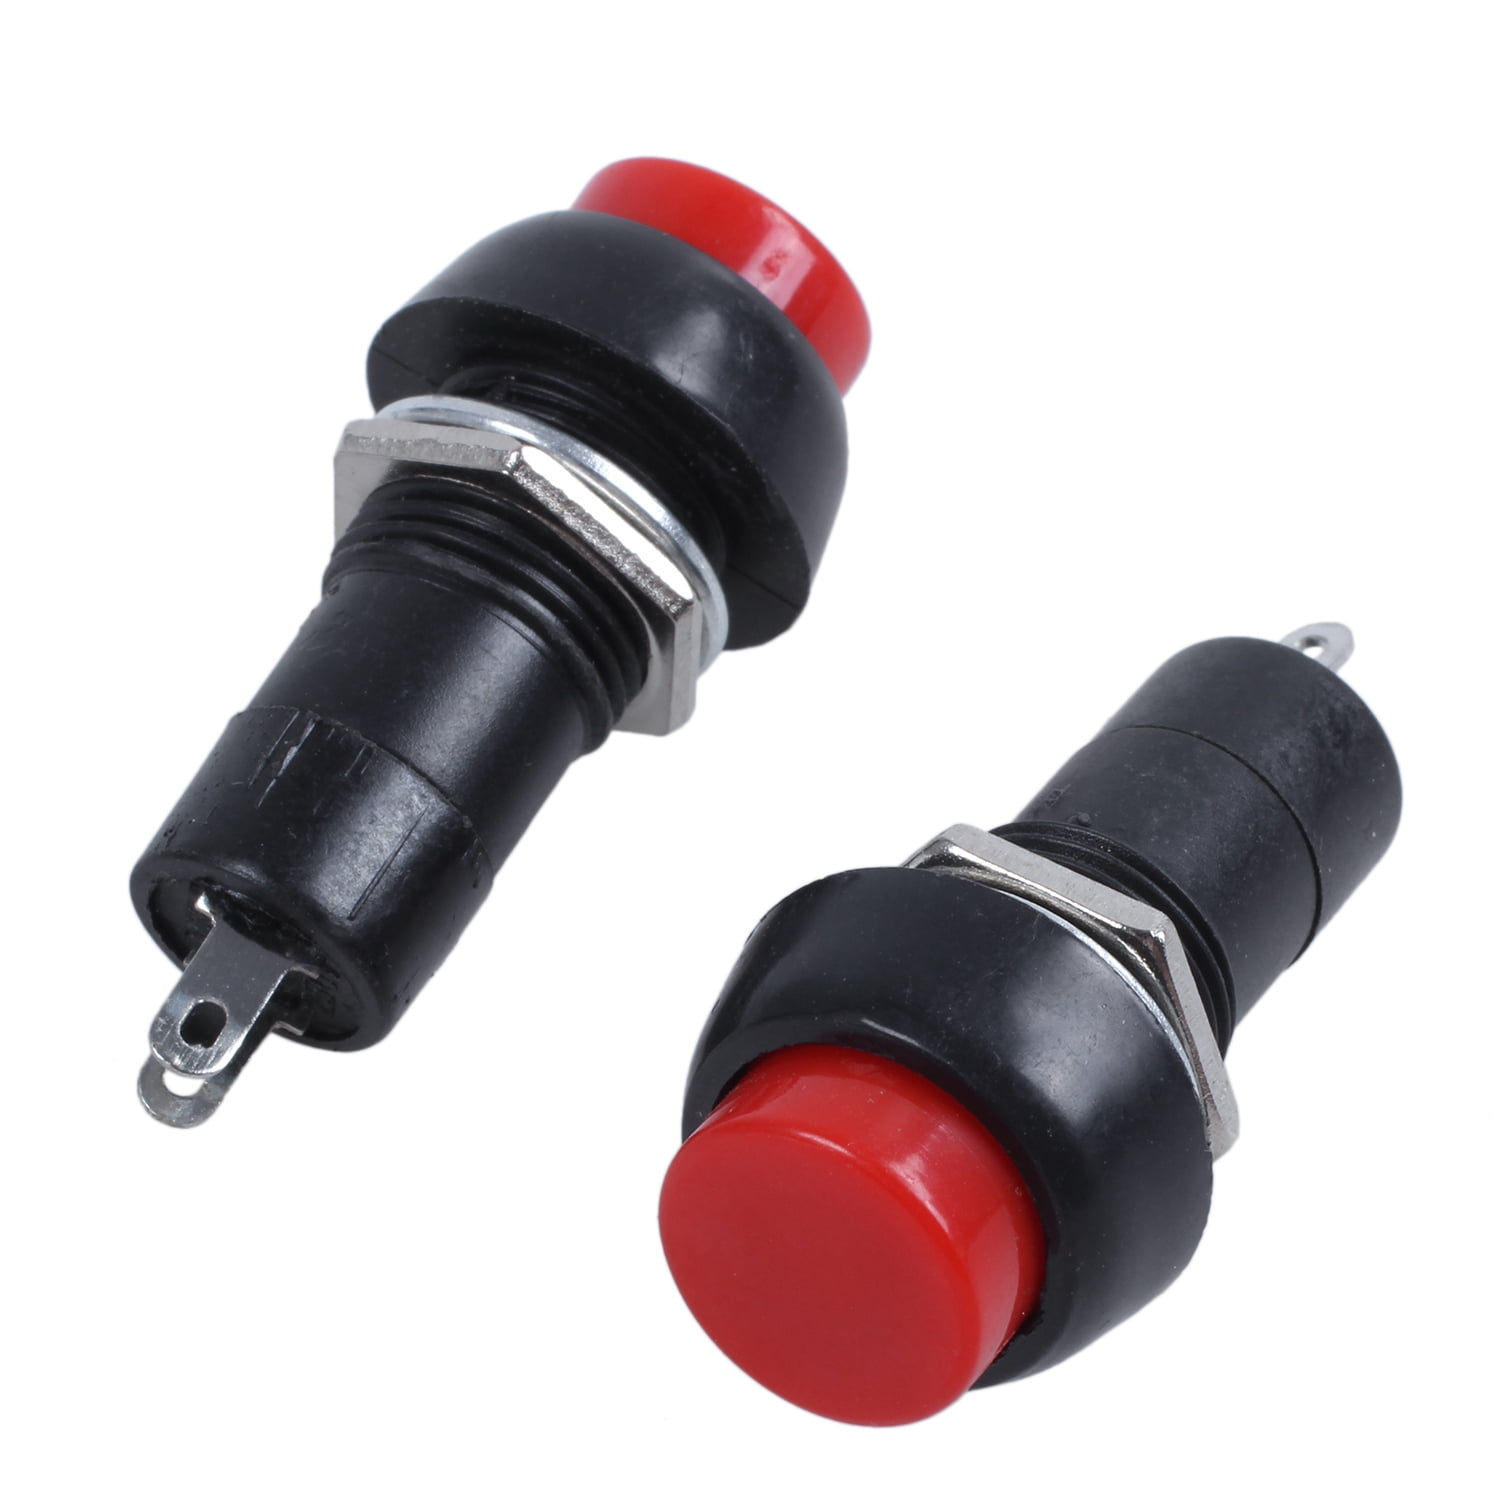 ON 2pcs 2Pin SPST OFF- N/O Momentary Push Button Switch Normally Open G5T4 